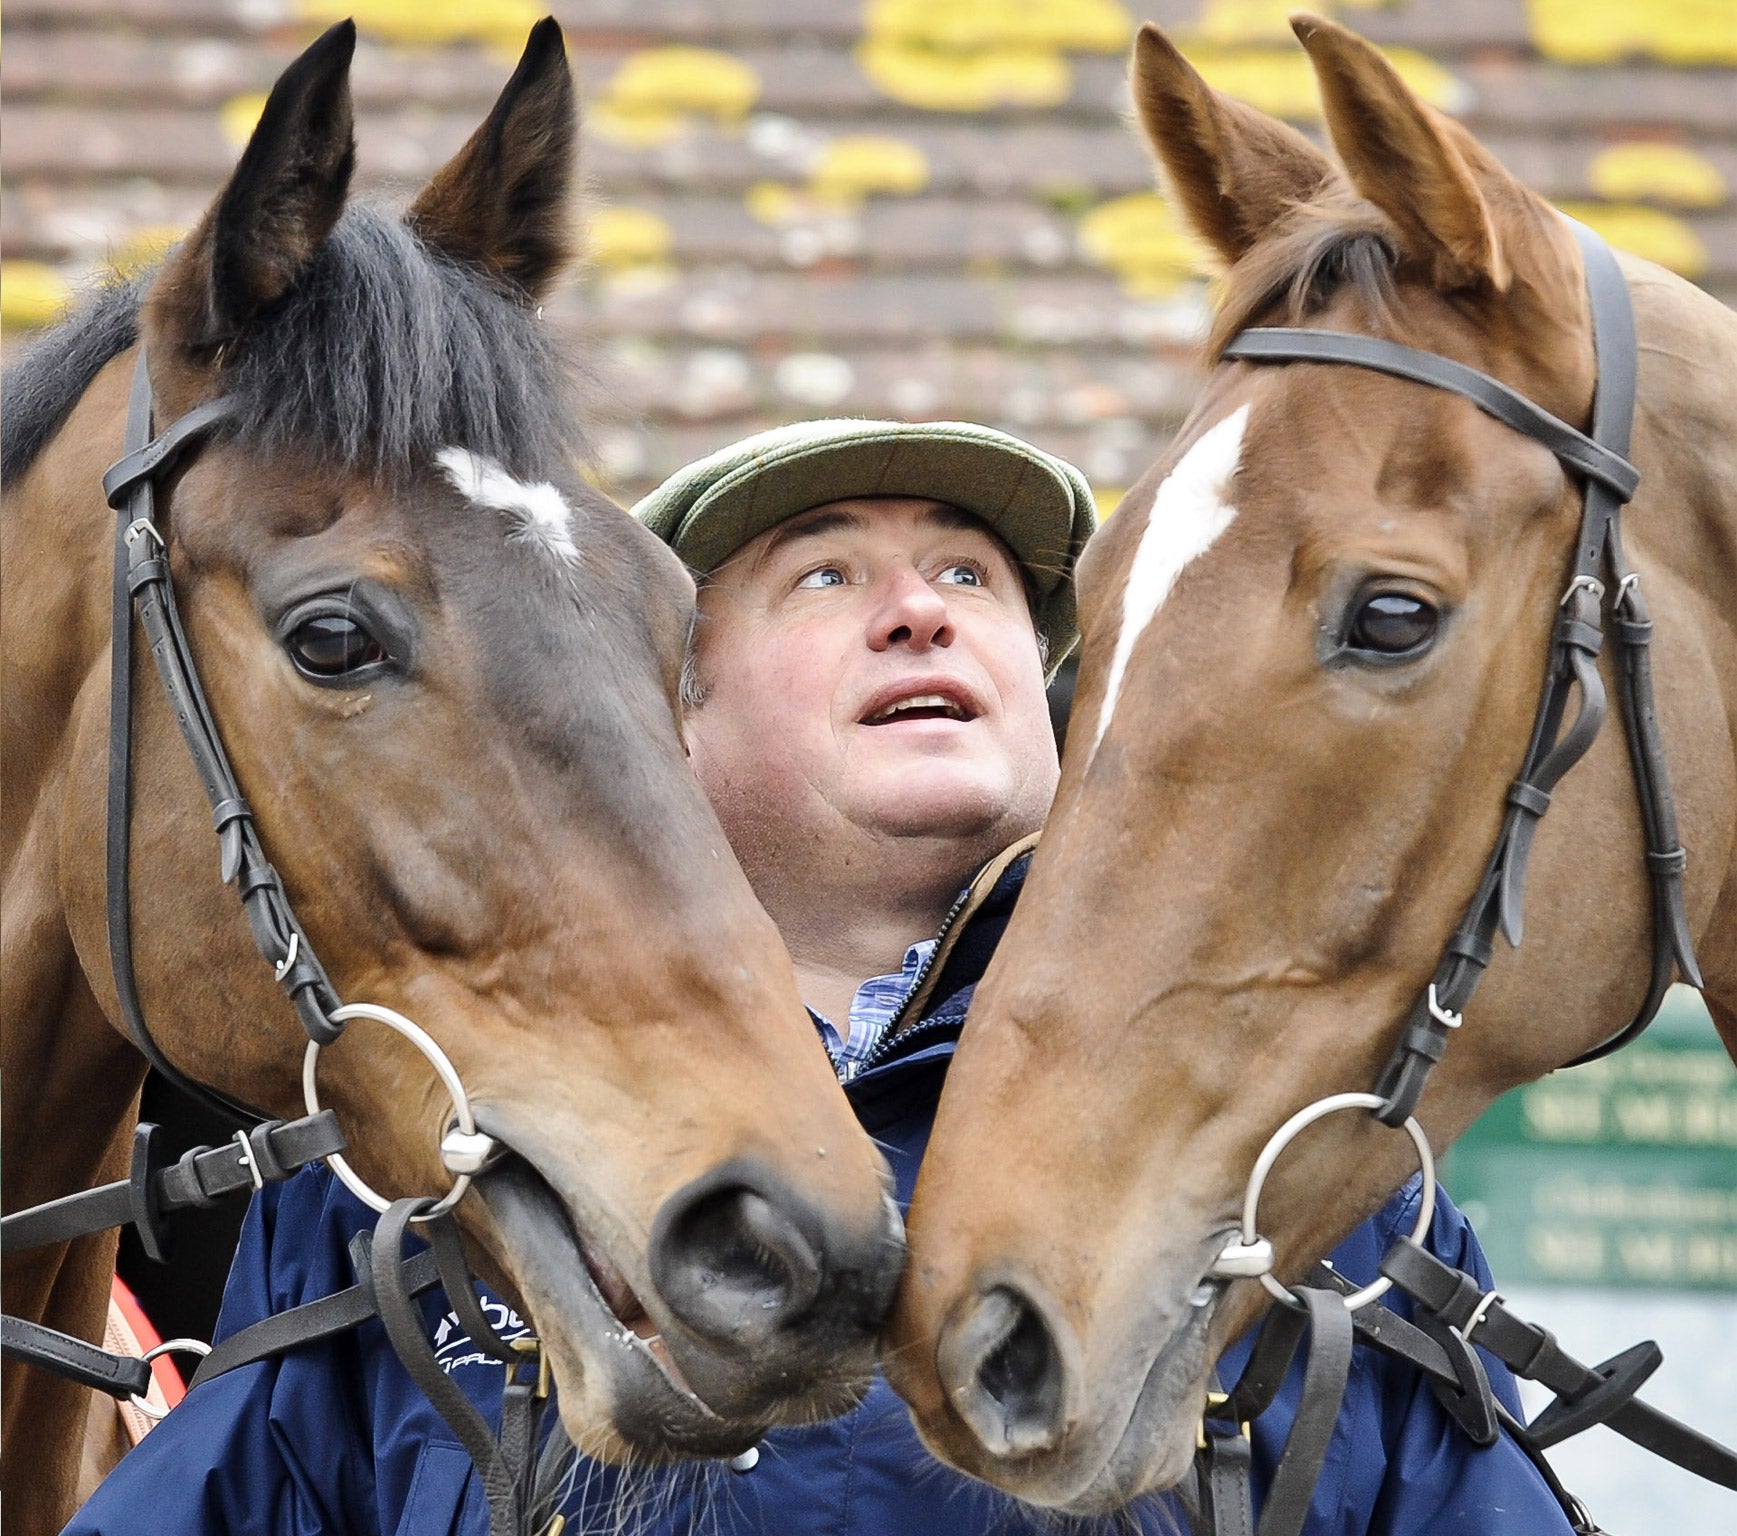 Champion trainer Paul Nicholls has high hopes for Silviniaco Conti (right) today